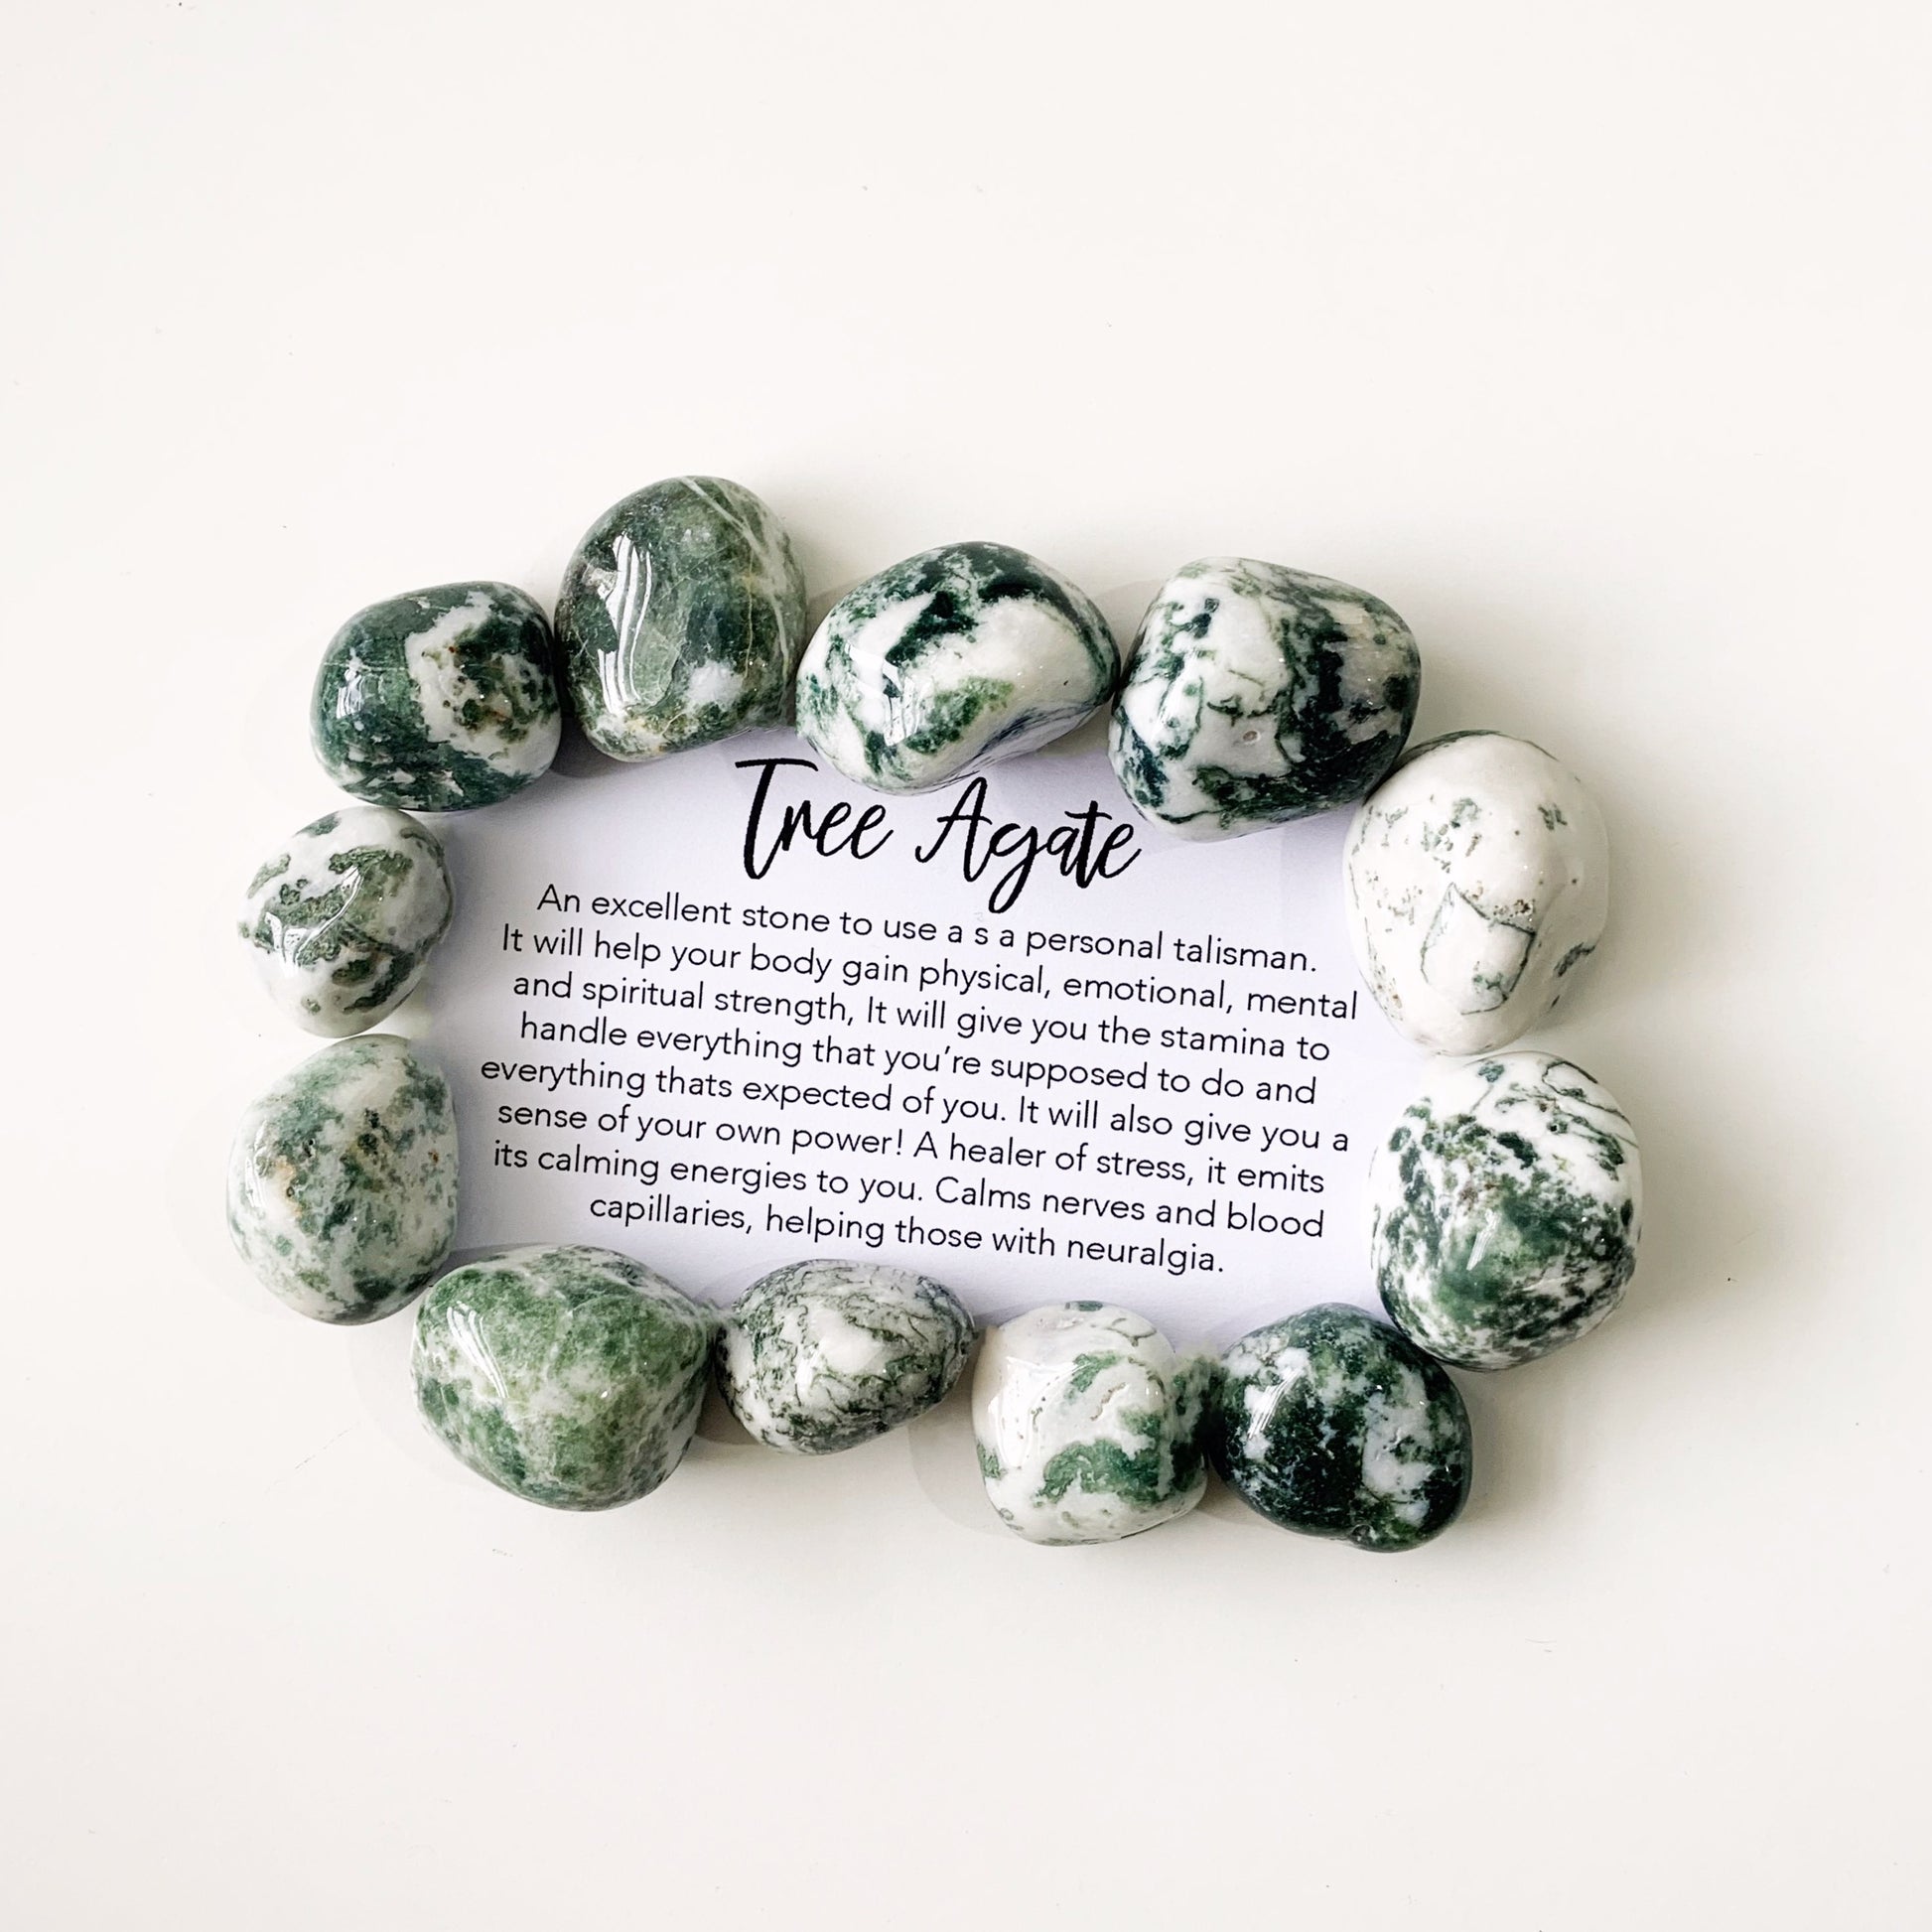 Tree Agate is a stone of inner peace. Gentle Tree Agate calms nerves, and can be combined with Clear Quartz to deepen meditation and prayer. ... Tree Agate is a healer of geopathic stress; by emitting its calming and centering energies into the environment.   Listing 1 stone.